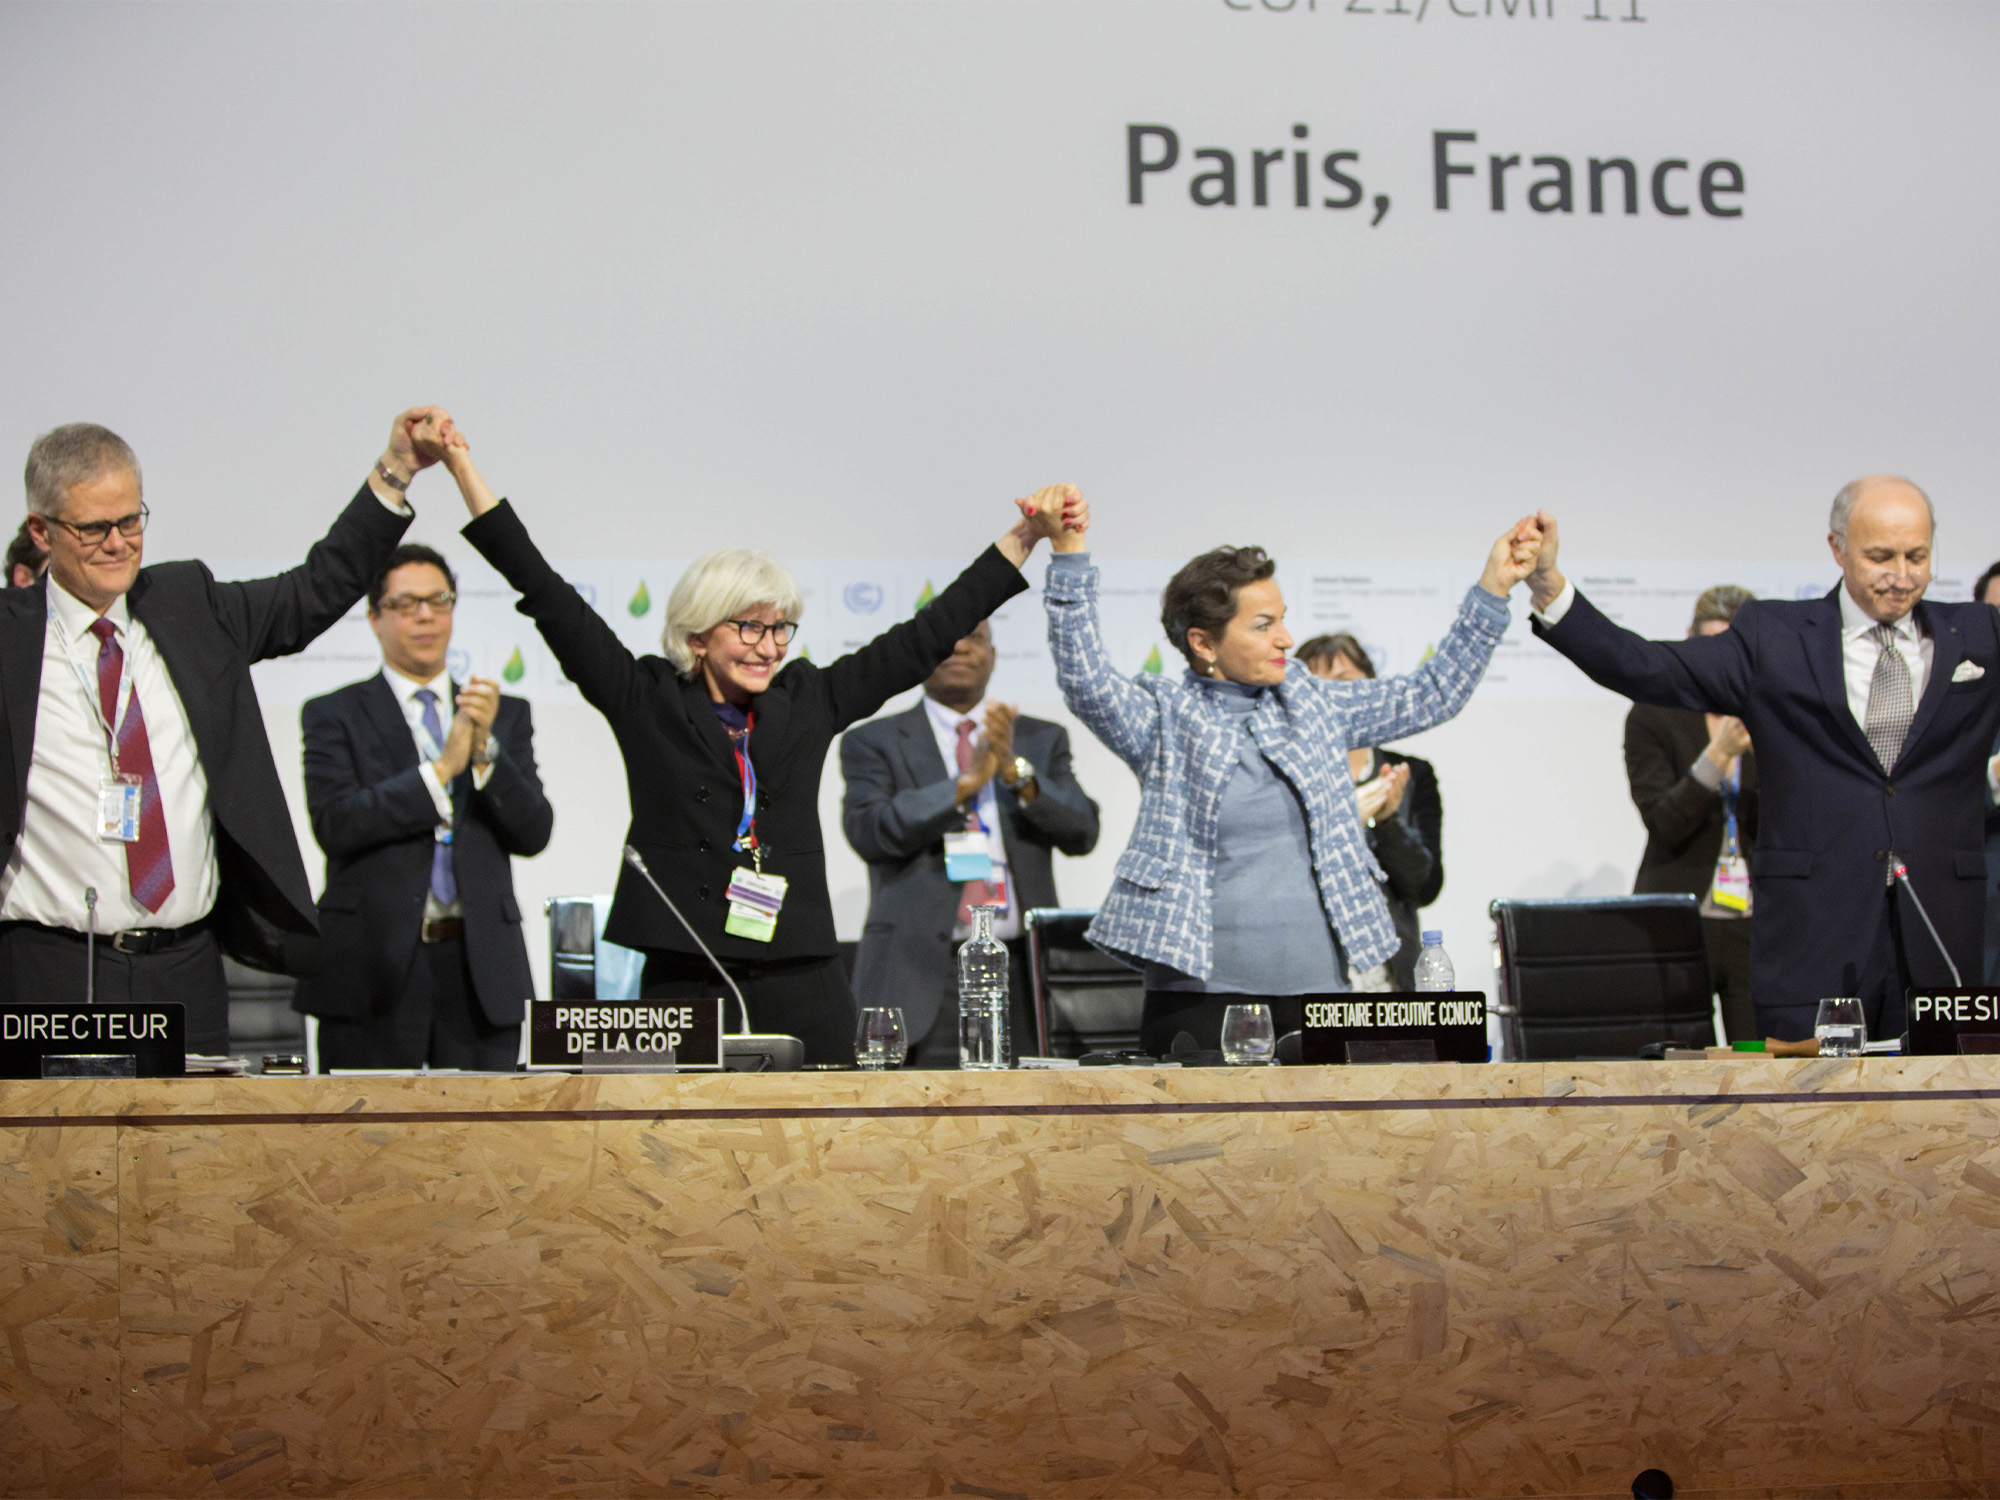 Policymakers at the creating of the Paris Agreement.